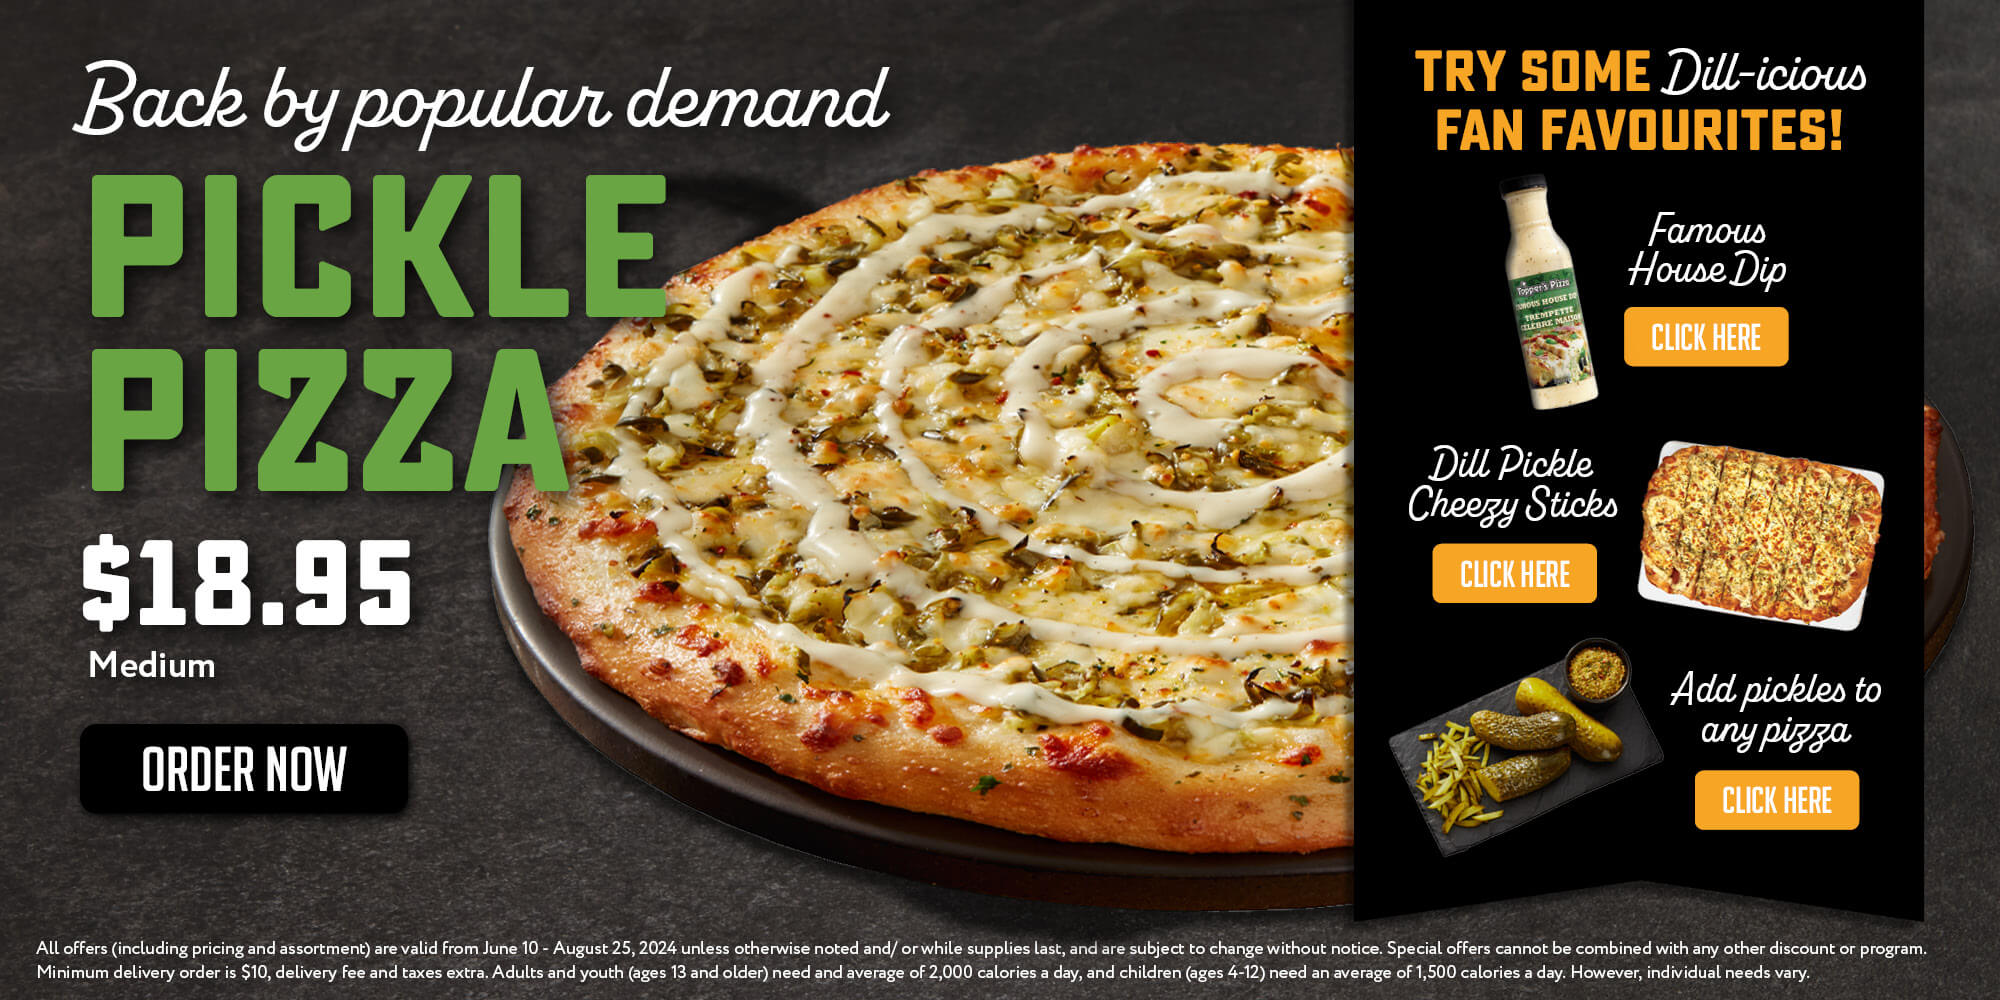 Pickle Pizza for $18.95